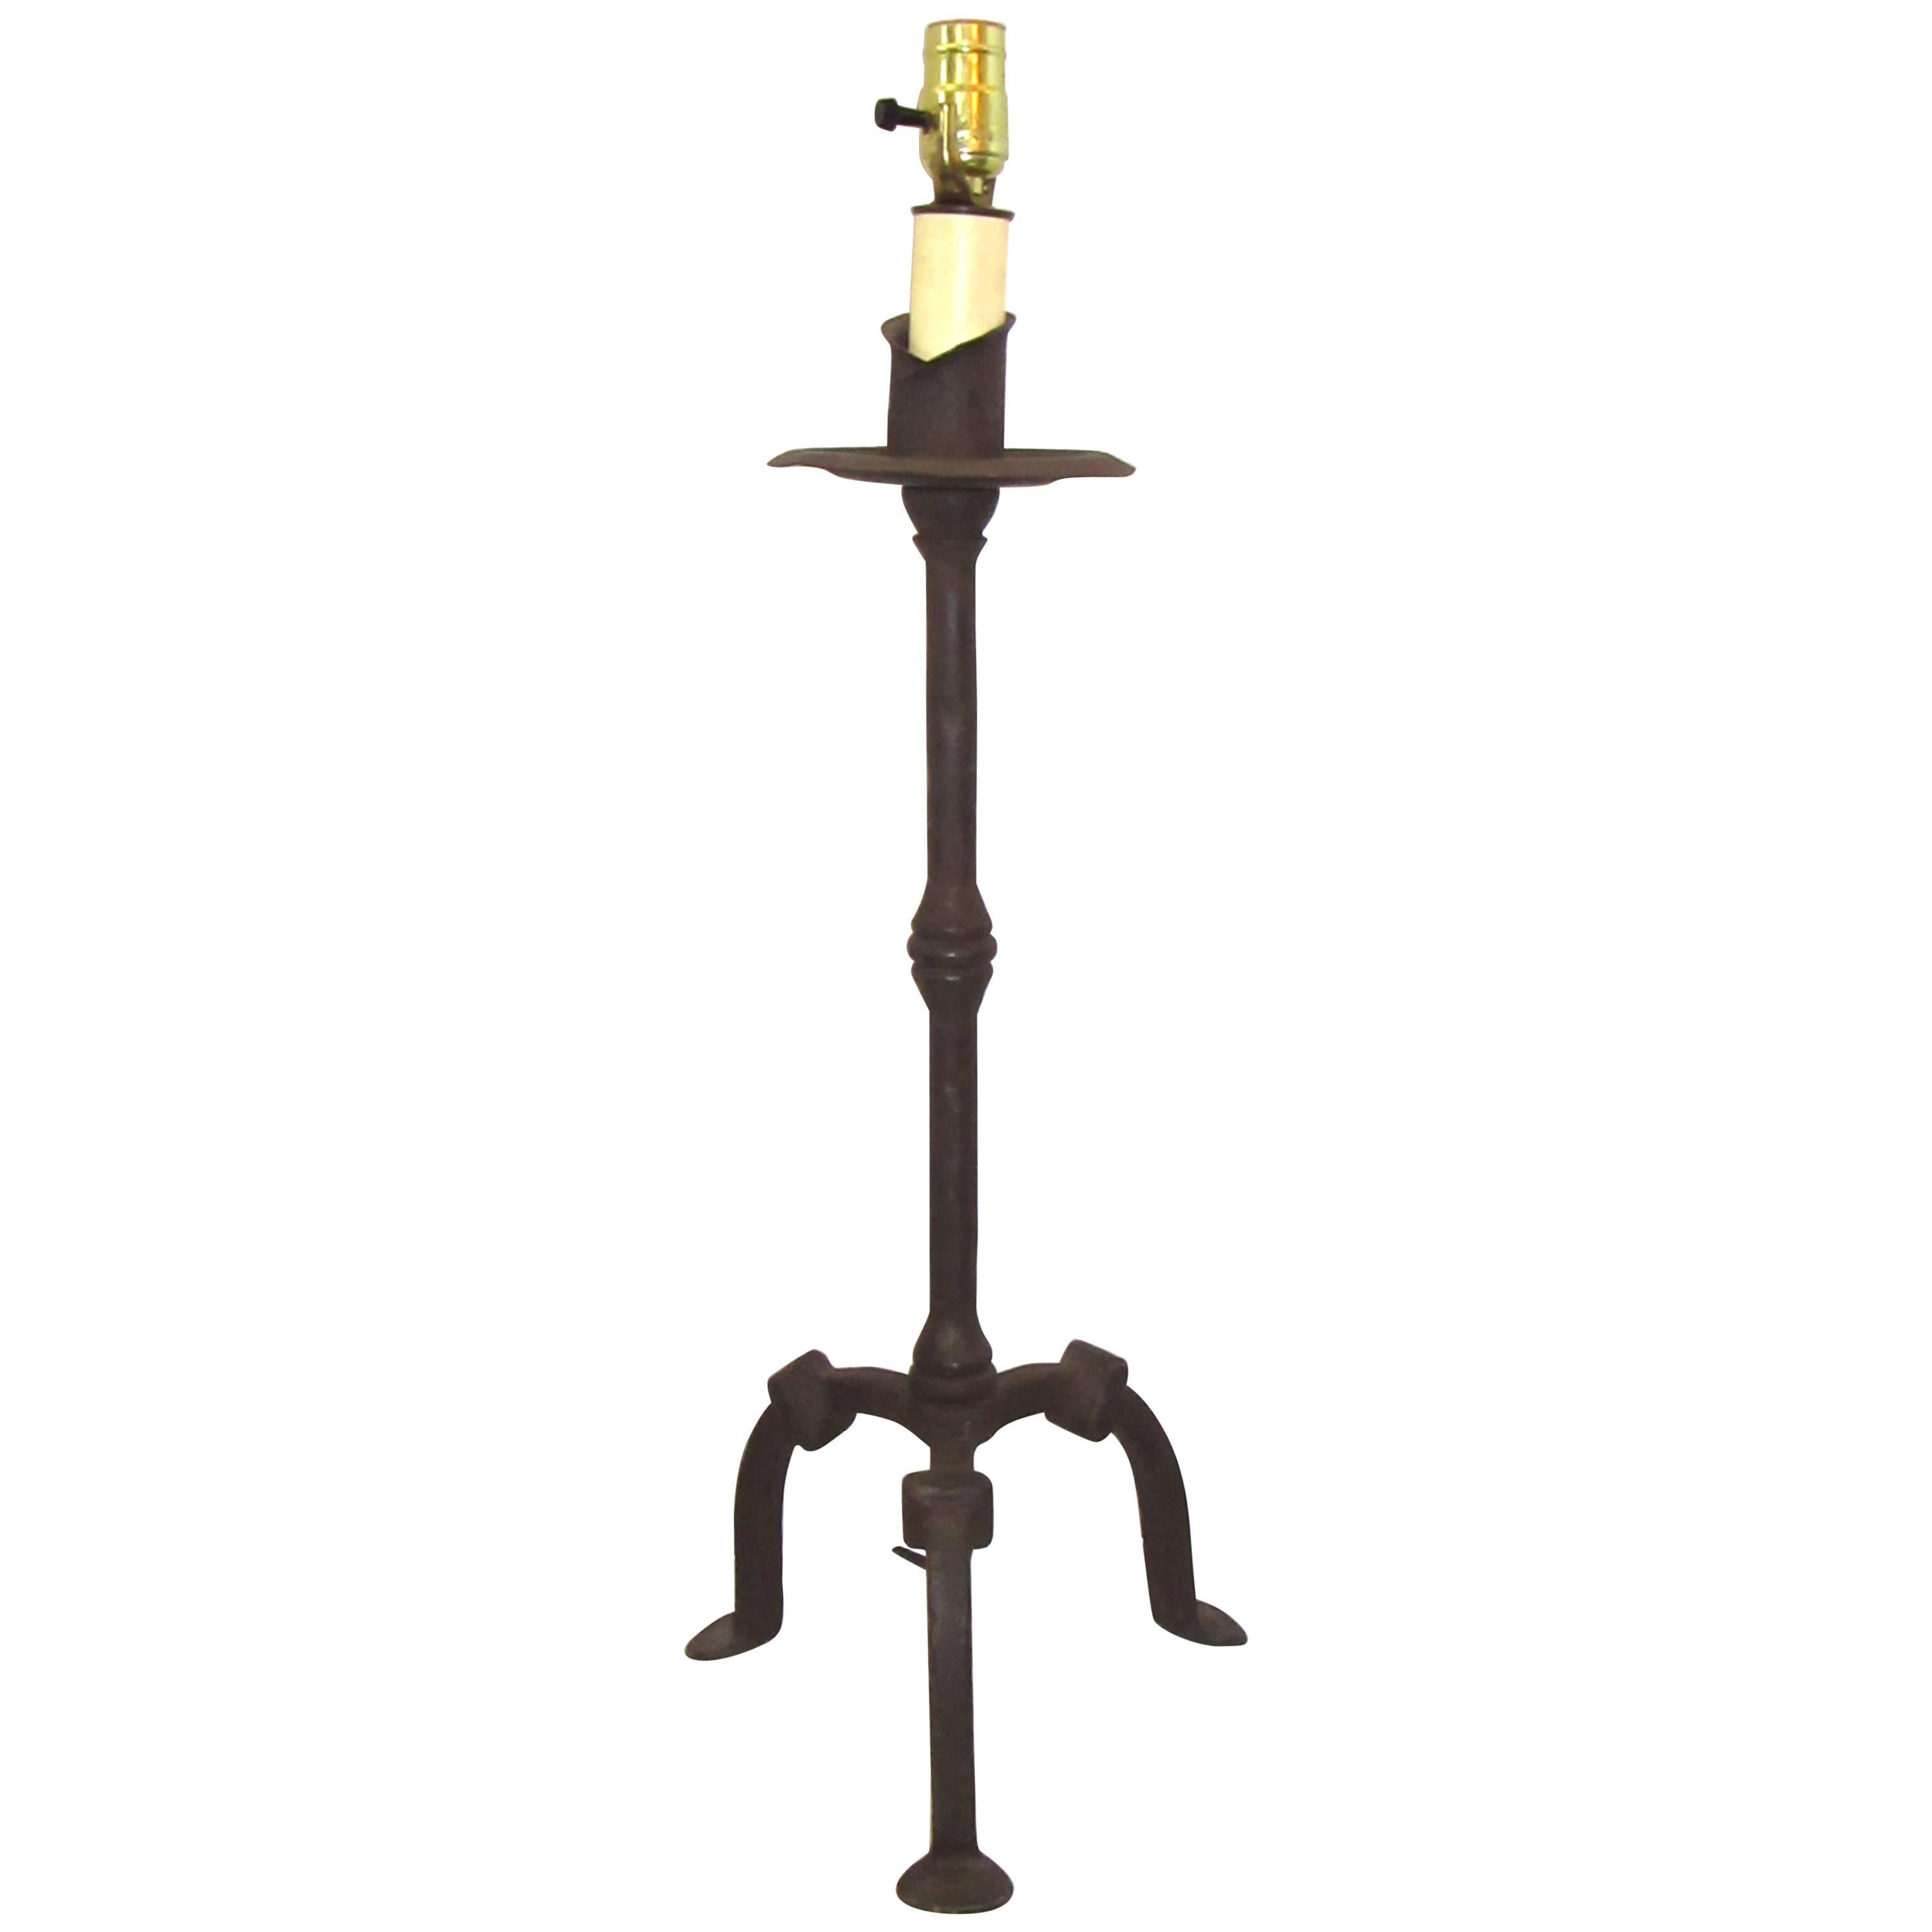 Hand-Wrought Iron Tripod Table Lamp